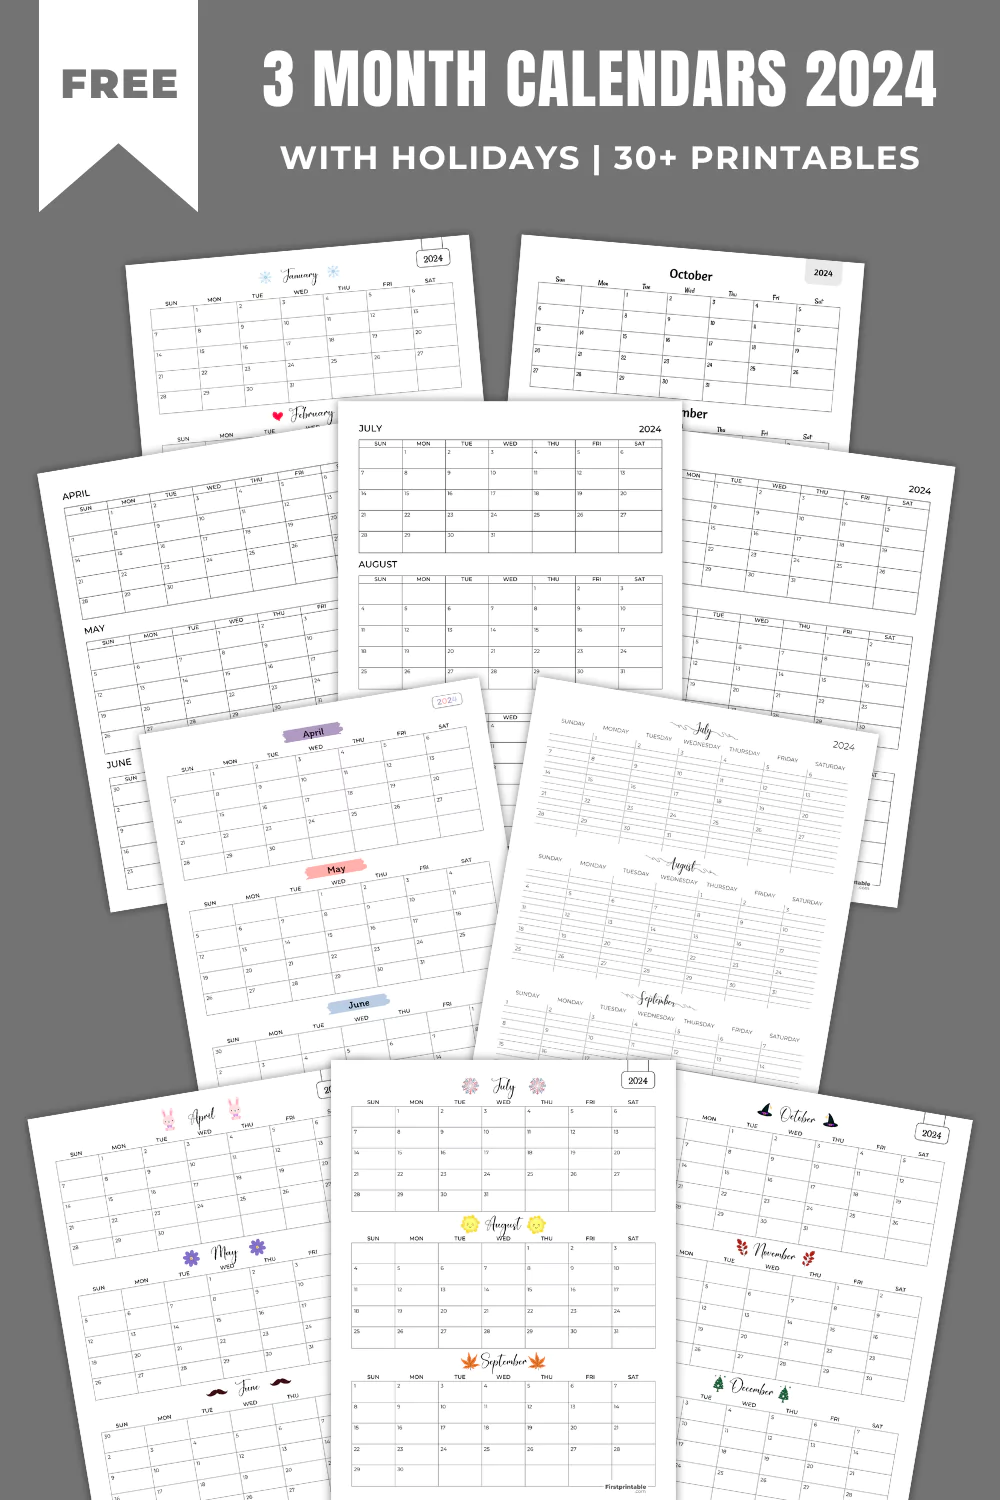 Click here for Three Month 2024 Calendars